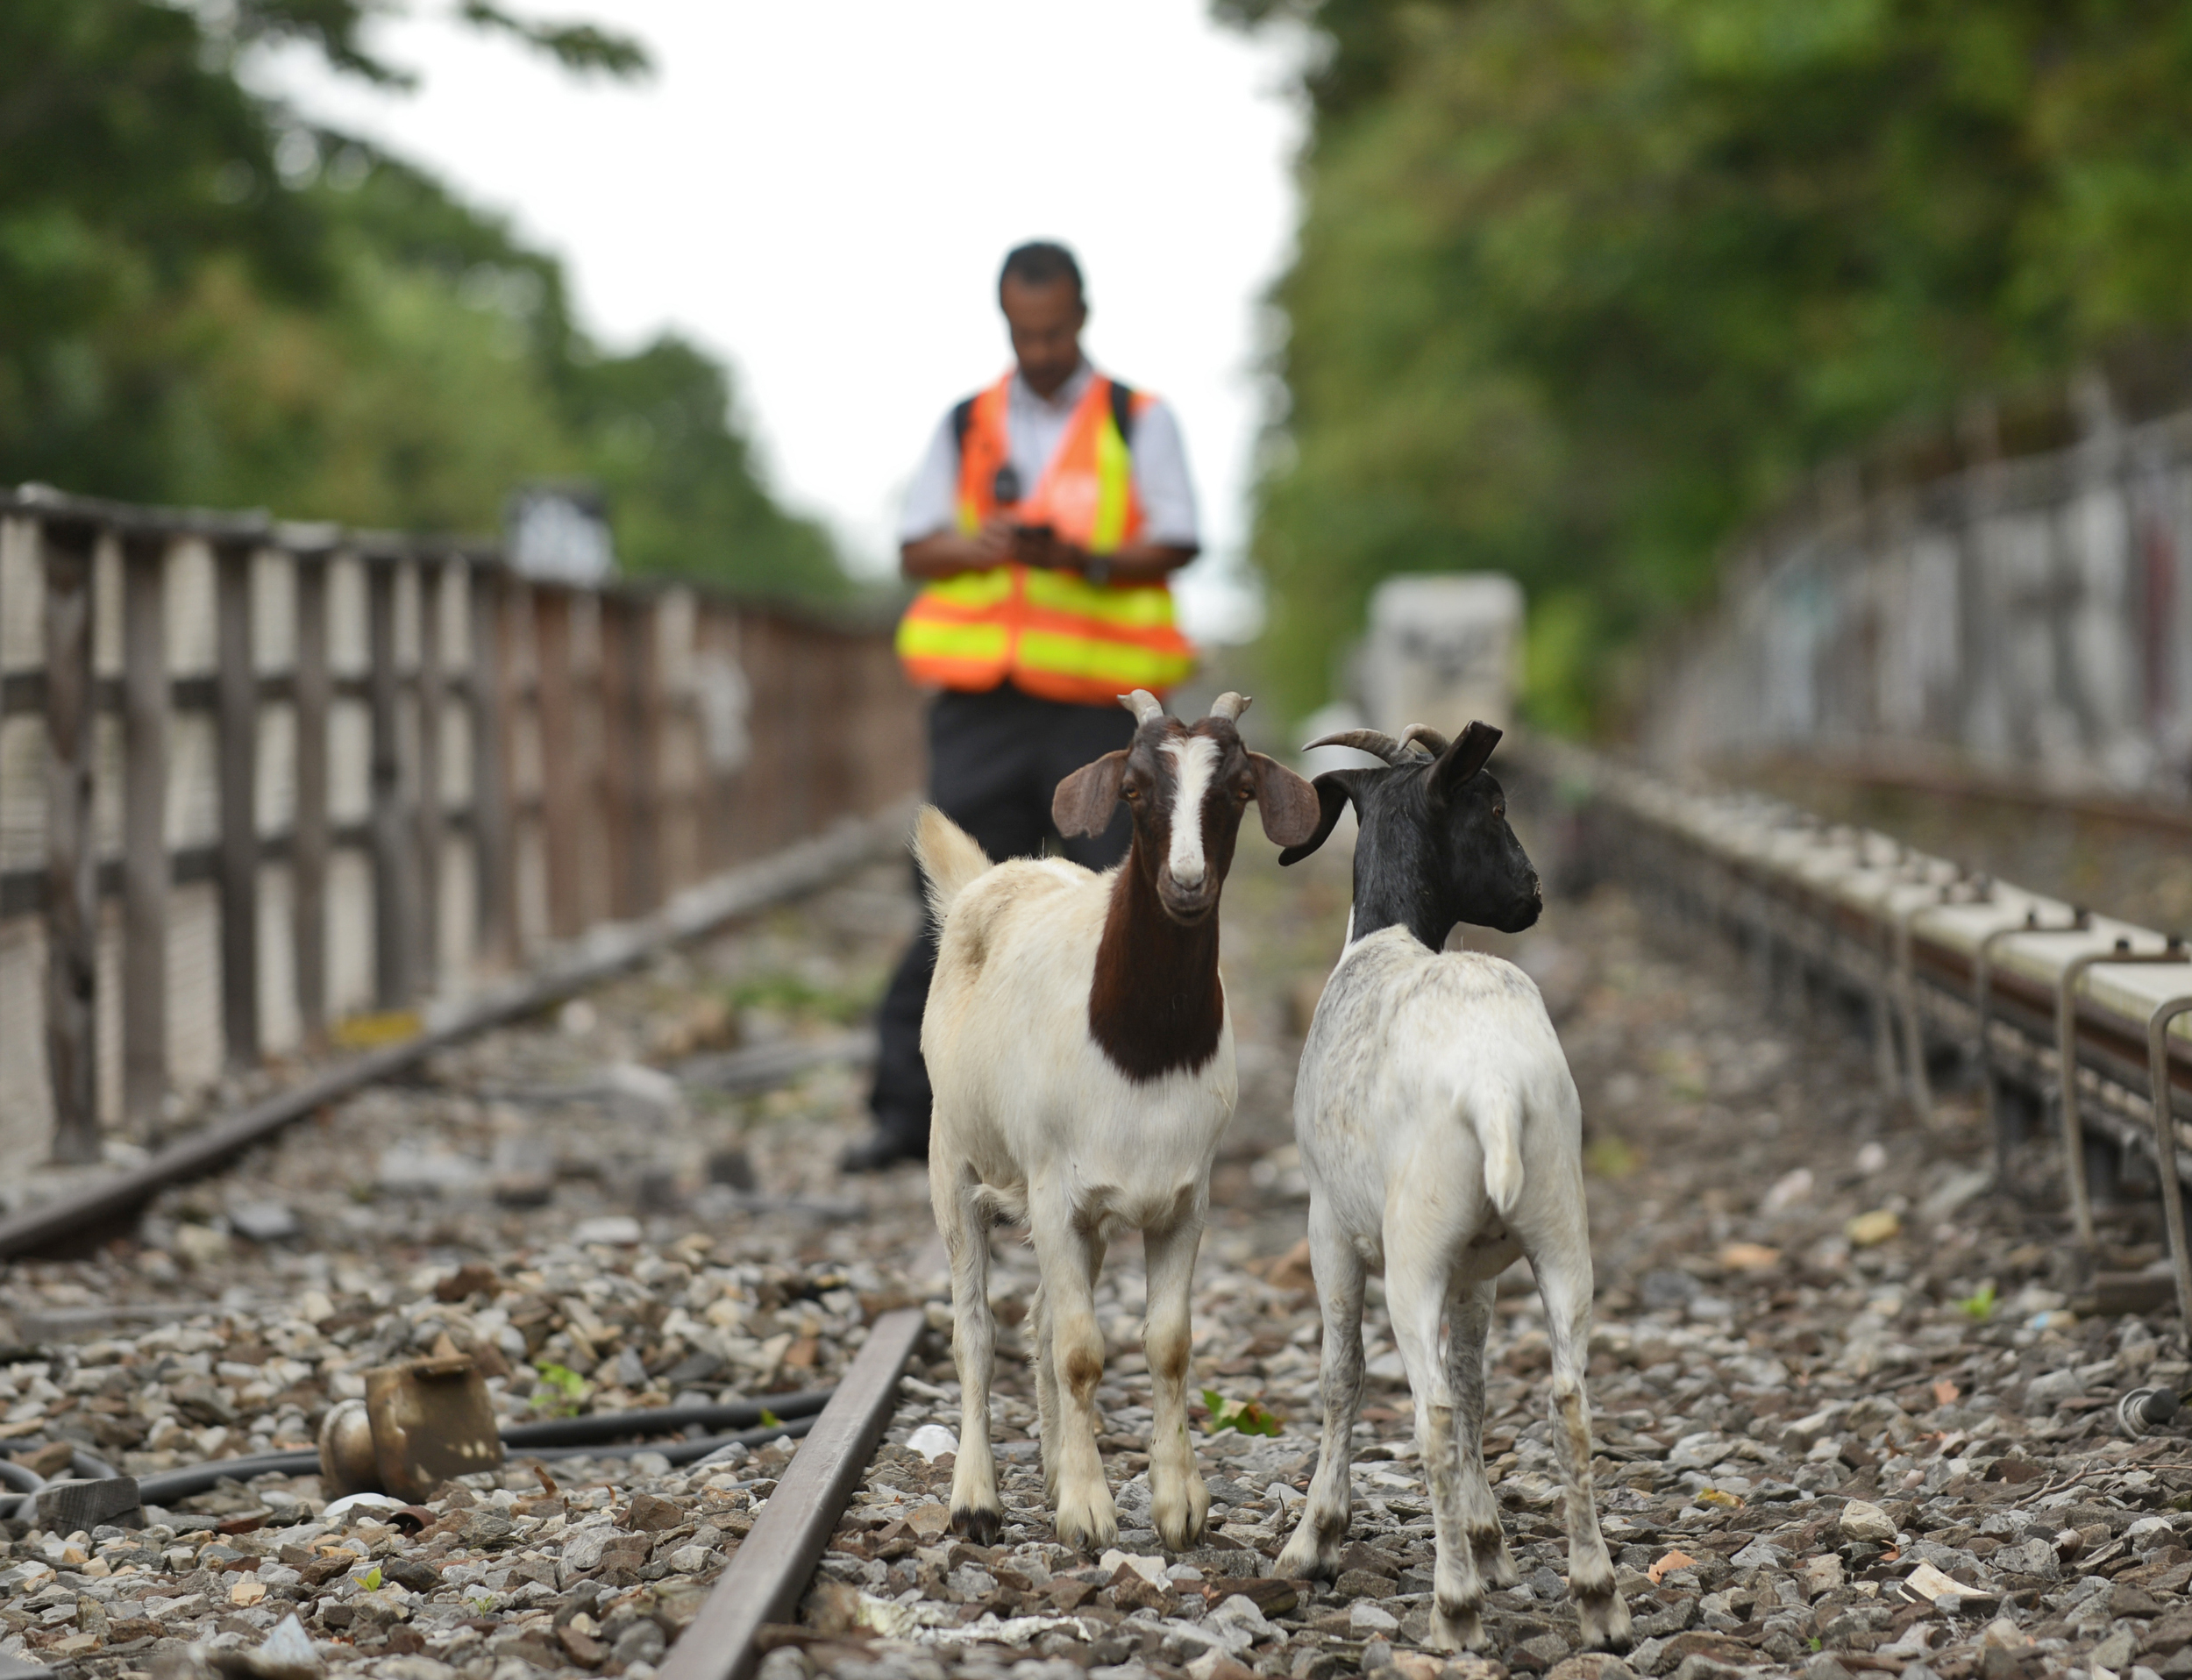 In August, two goats wandered onto the subway tracks in Brooklyn. Marc A. Hermann / MTA New York City Transit